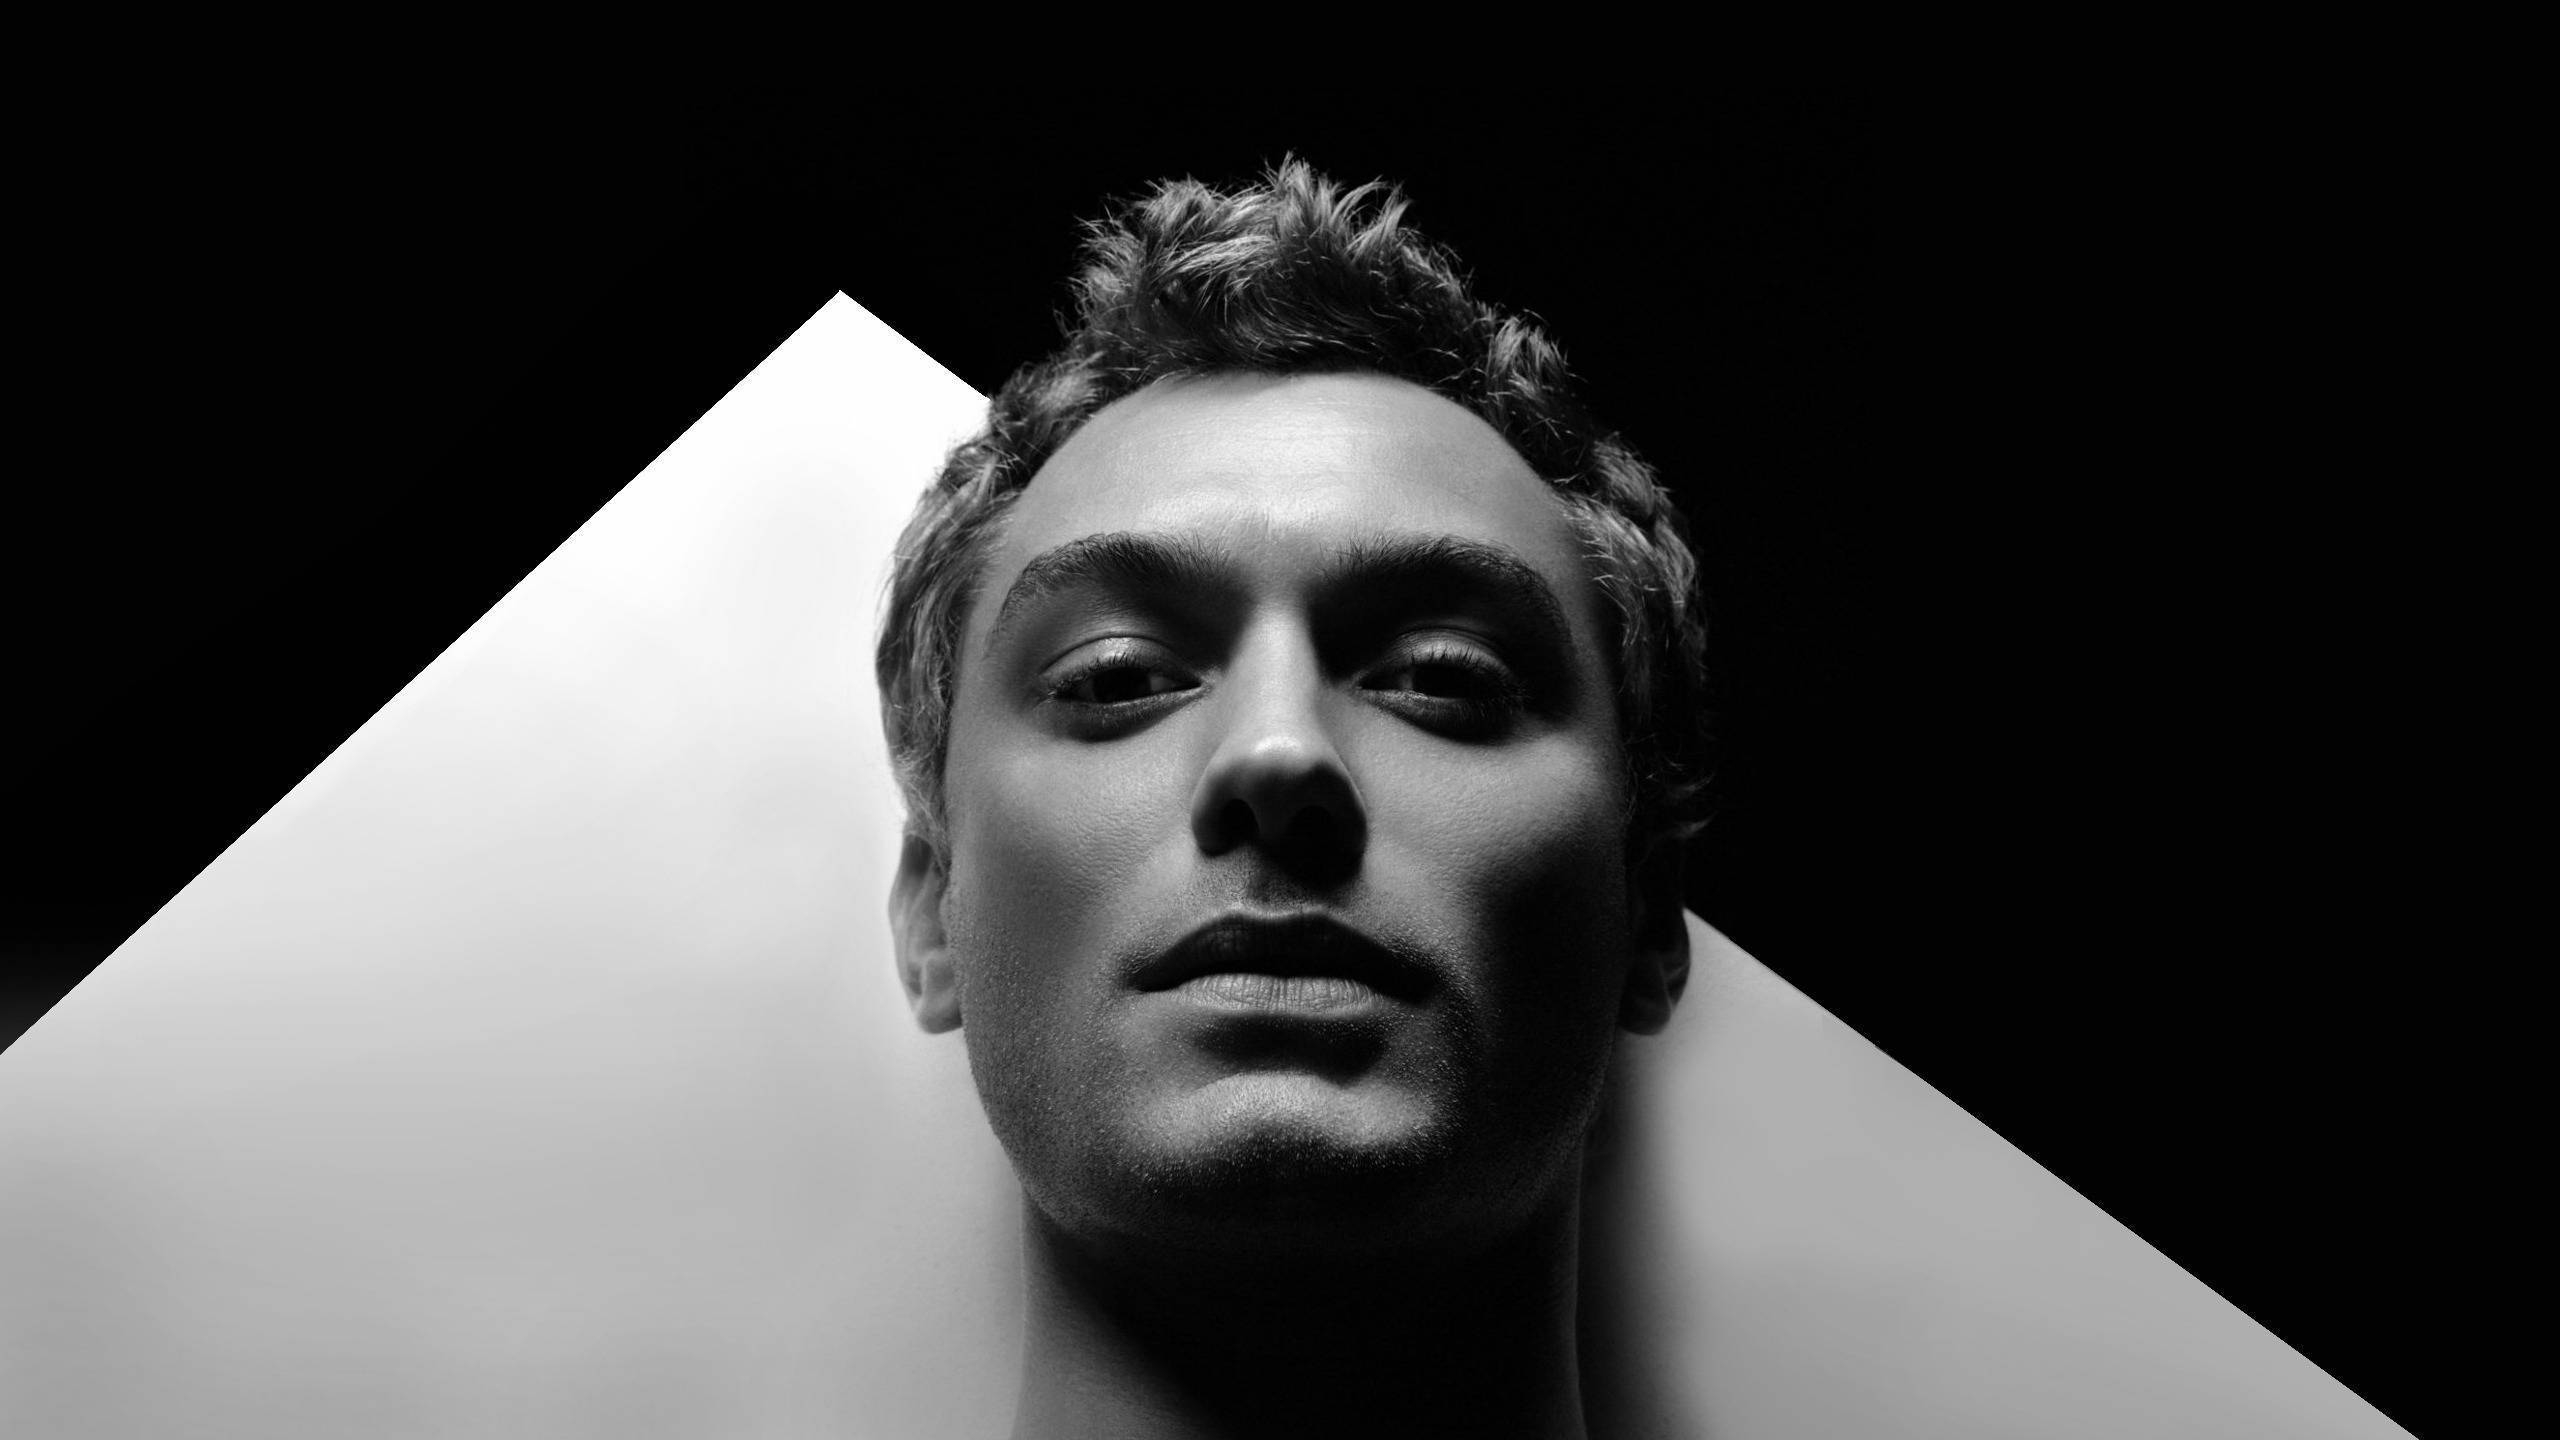 Jude Law Monochrome for 2560x1440 HDTV resolution